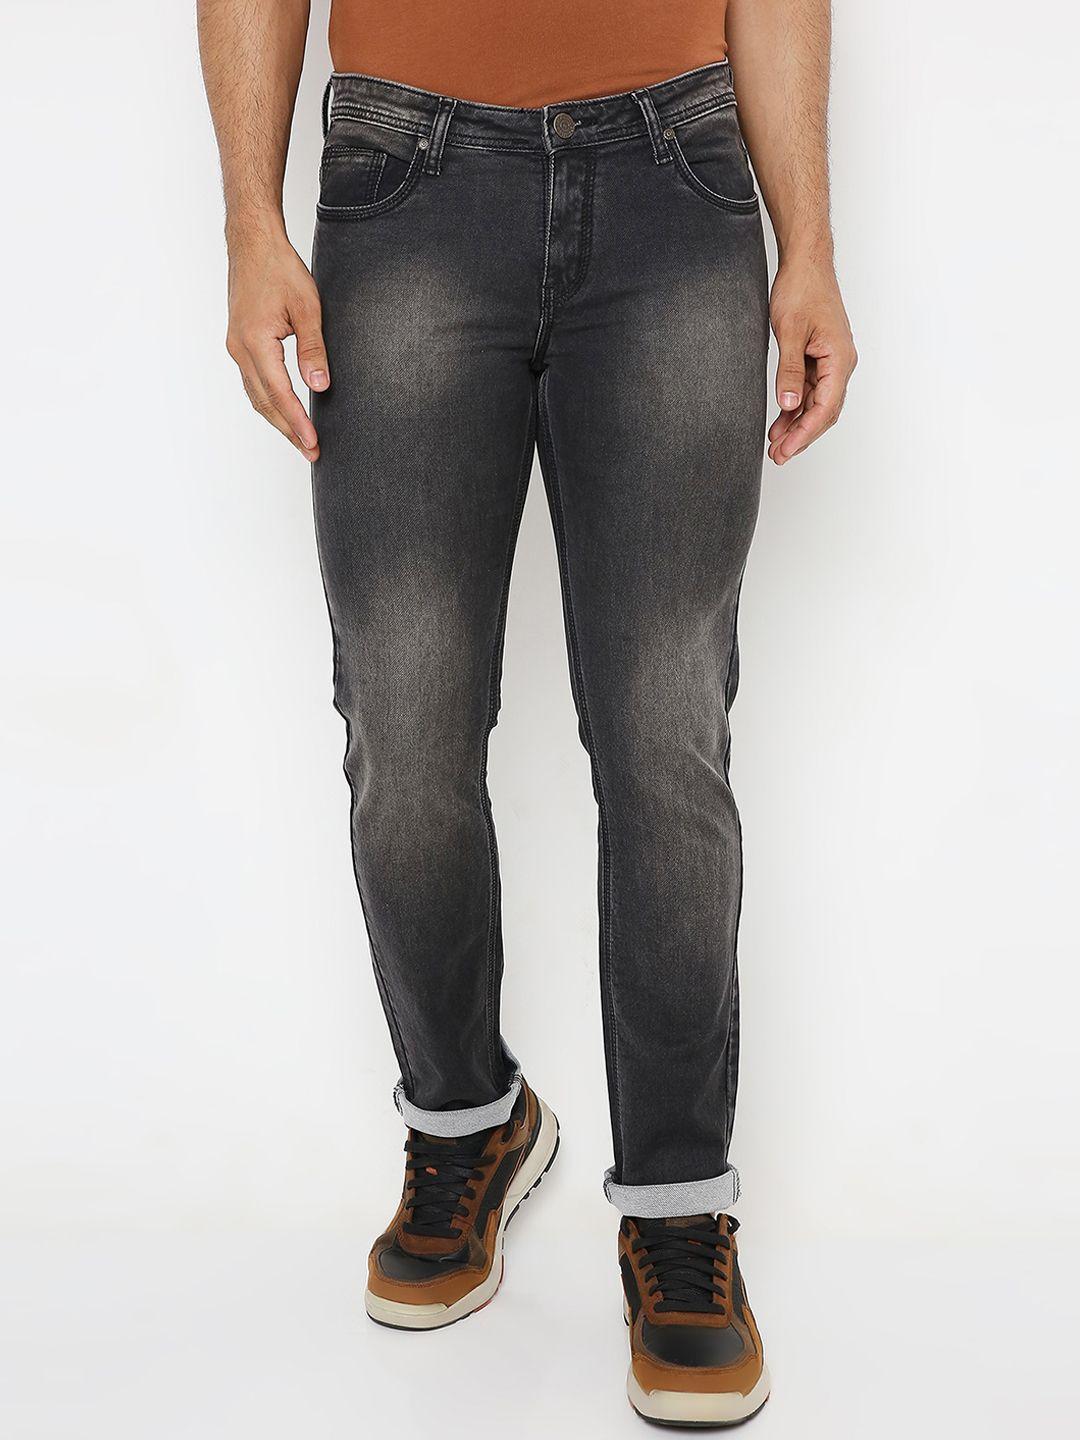 hj-hasasi-men-grey-slim-fit-heavy-fade-stretchable-jeans